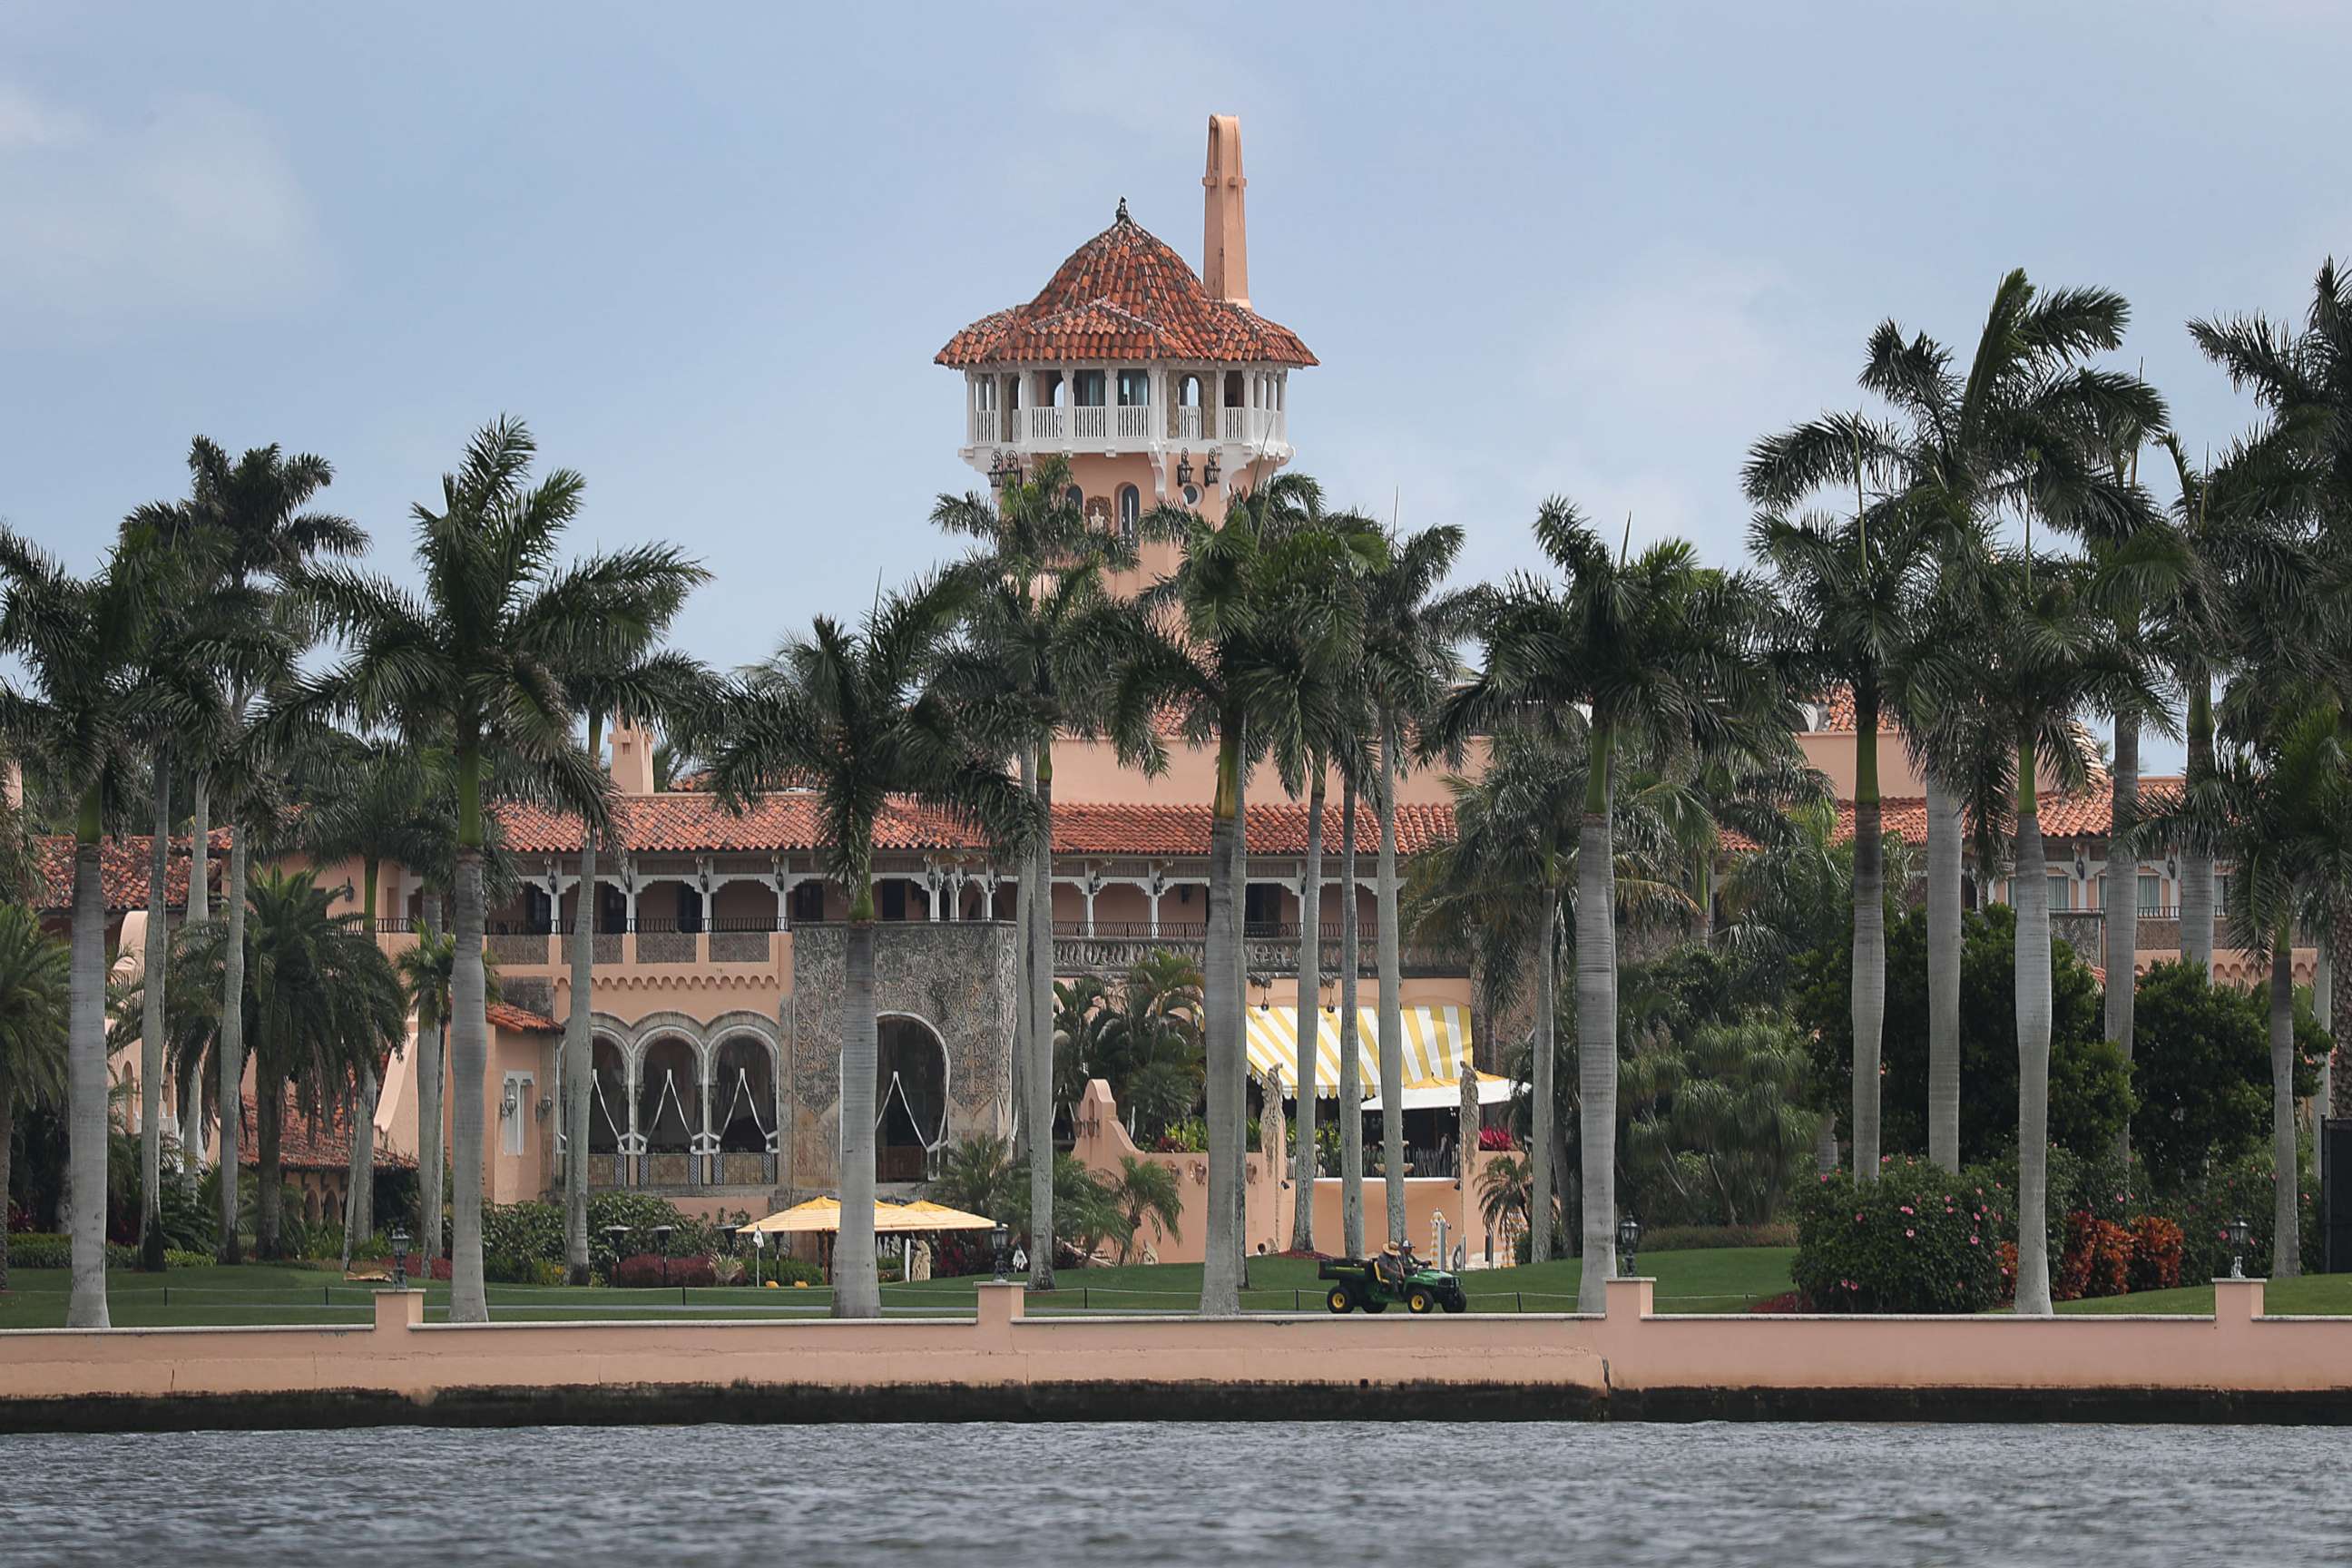 PHOTO: President Donald Trump's Mar-a-Lago resort is seen on April 03, 2019 in West Palm Beach, Florida.